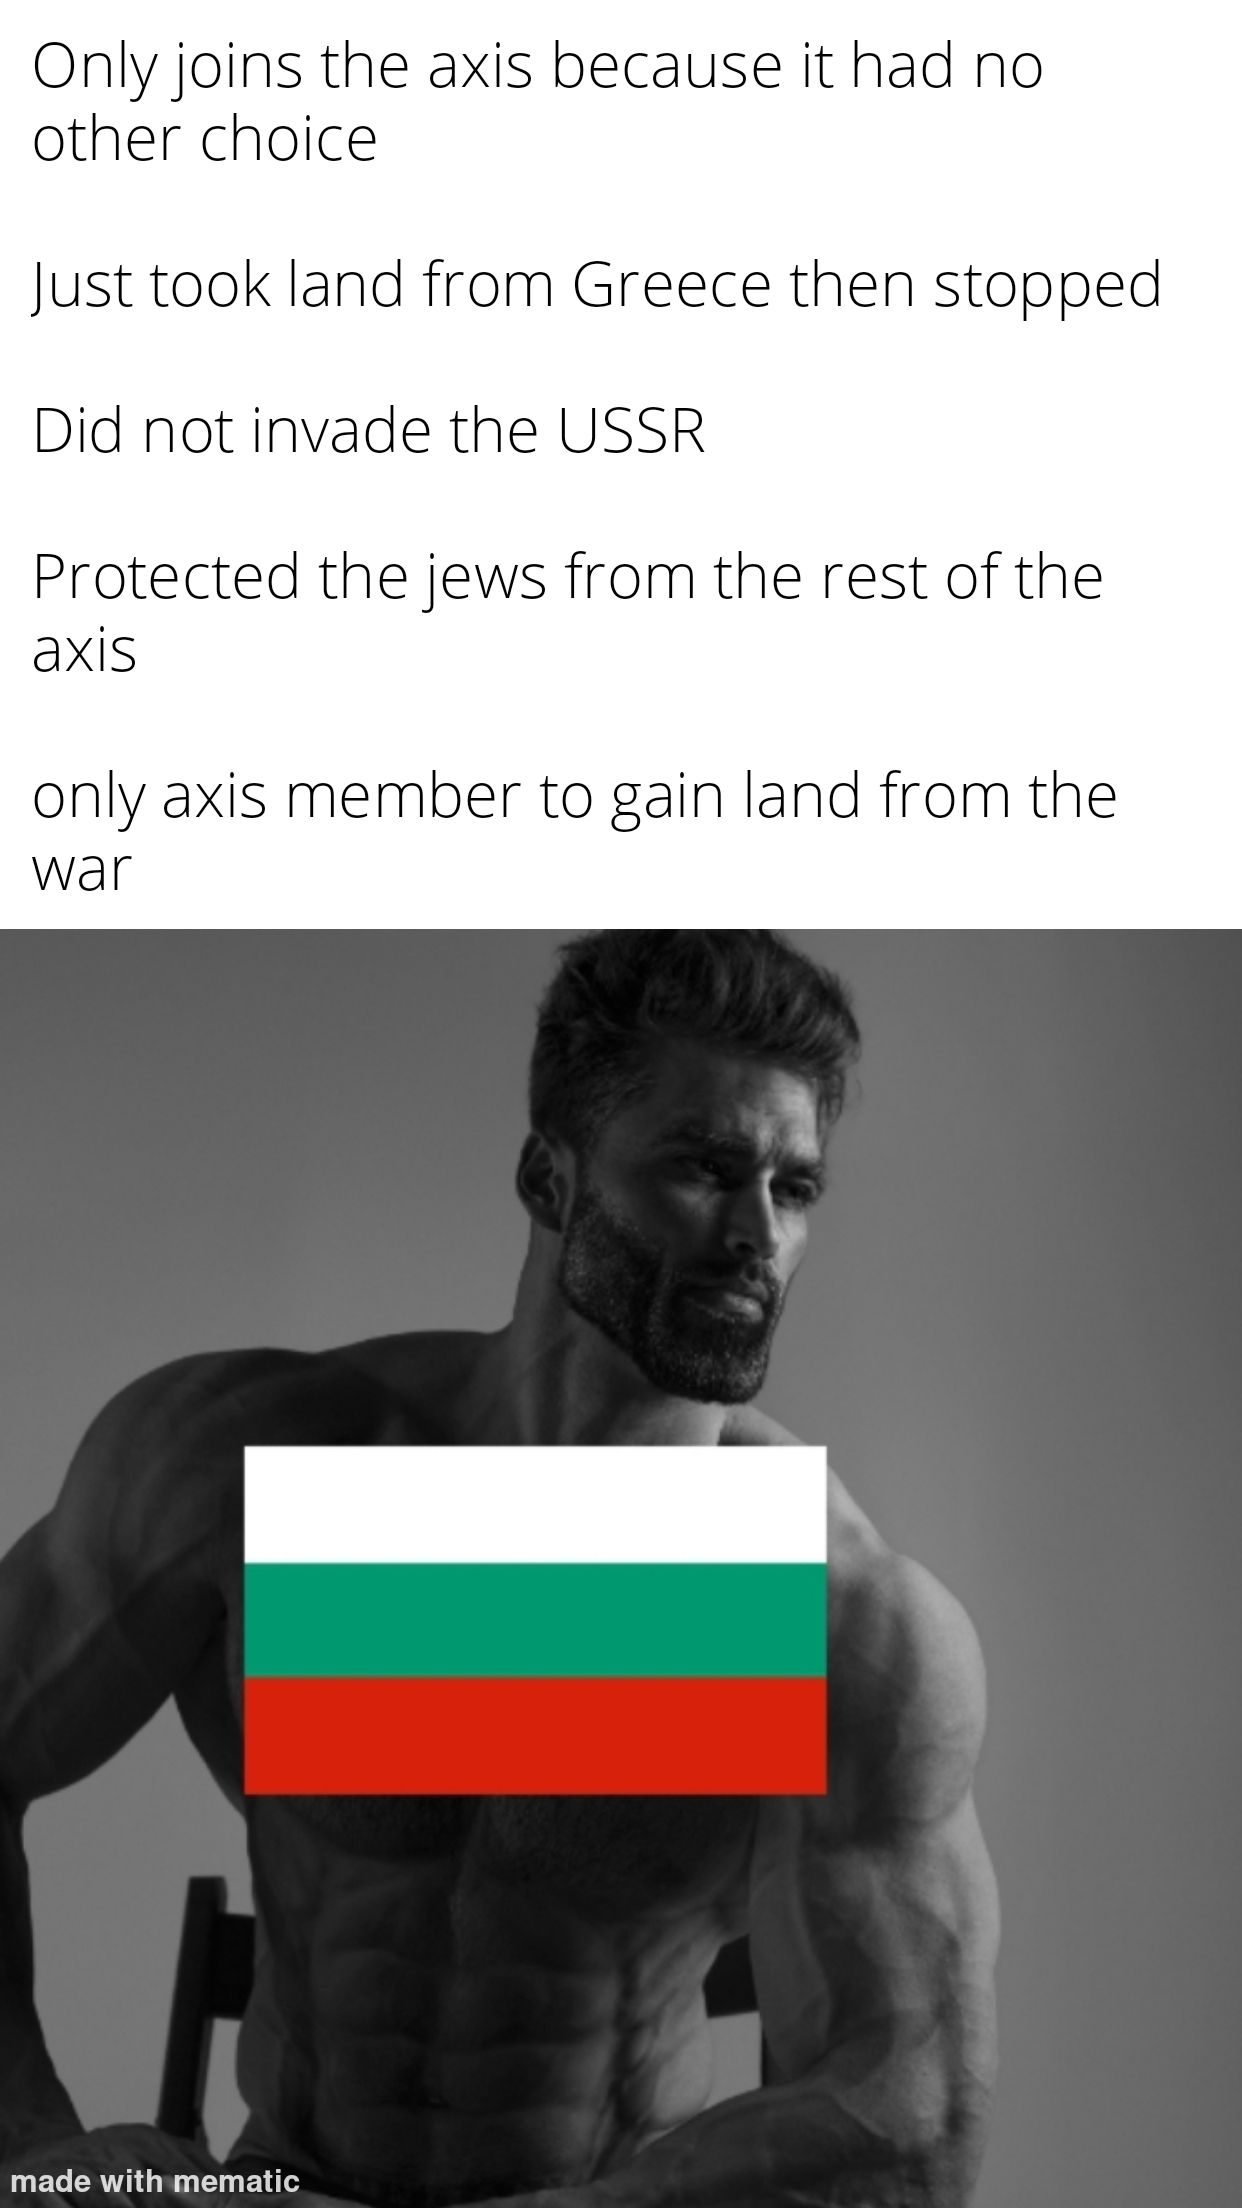 The only axis nation that I would call, "good"